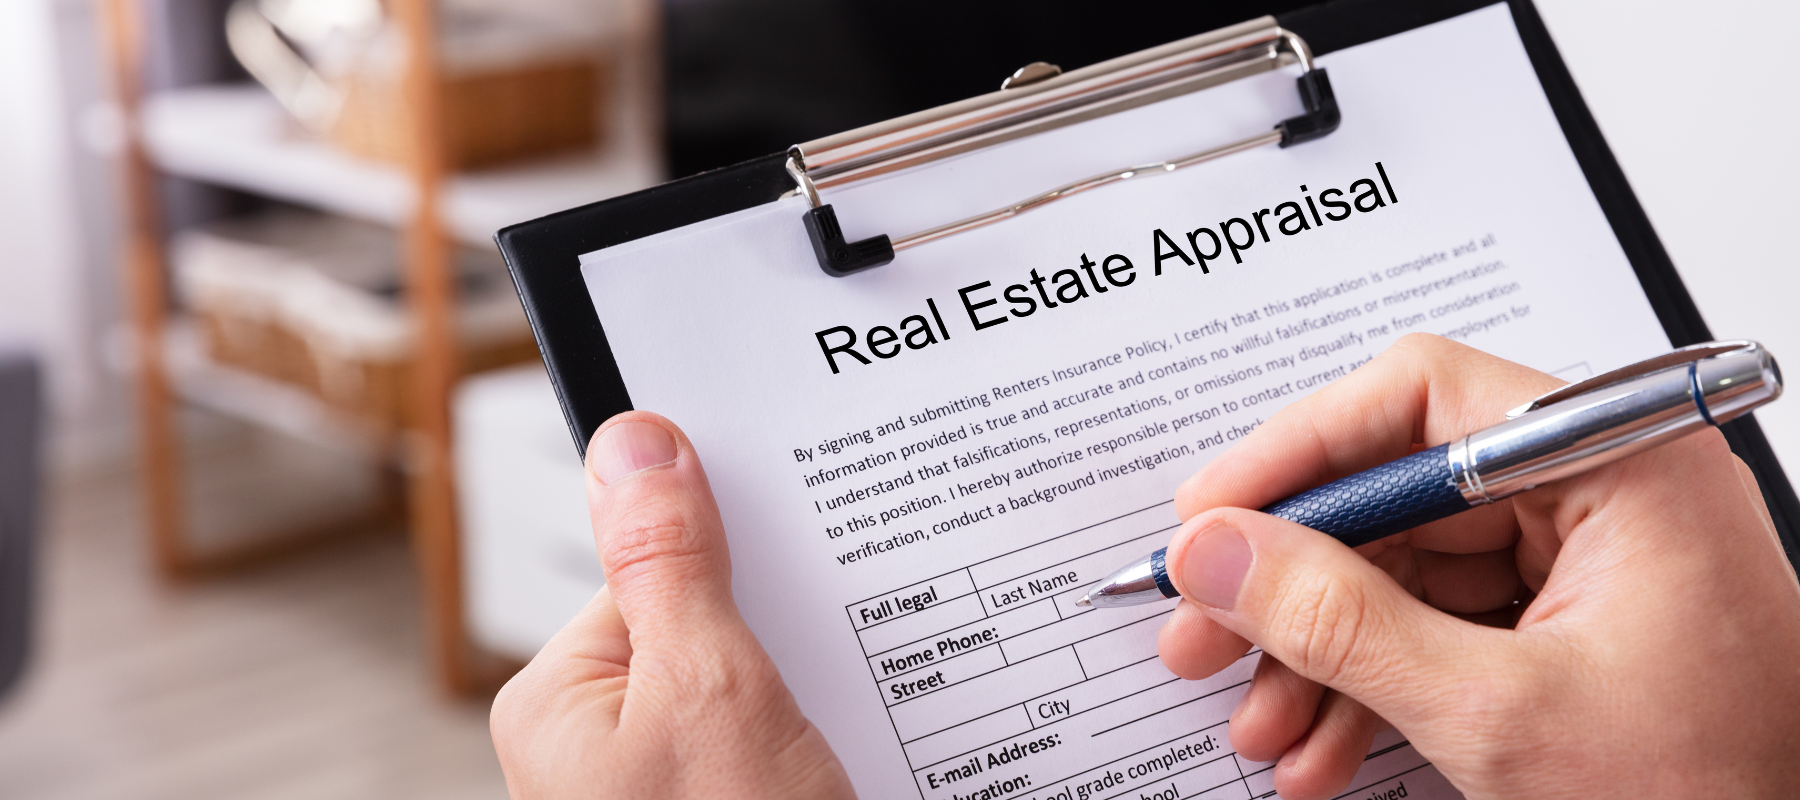 Amy Stockberger Real Estate - How to Prepare for a Home Appraisal